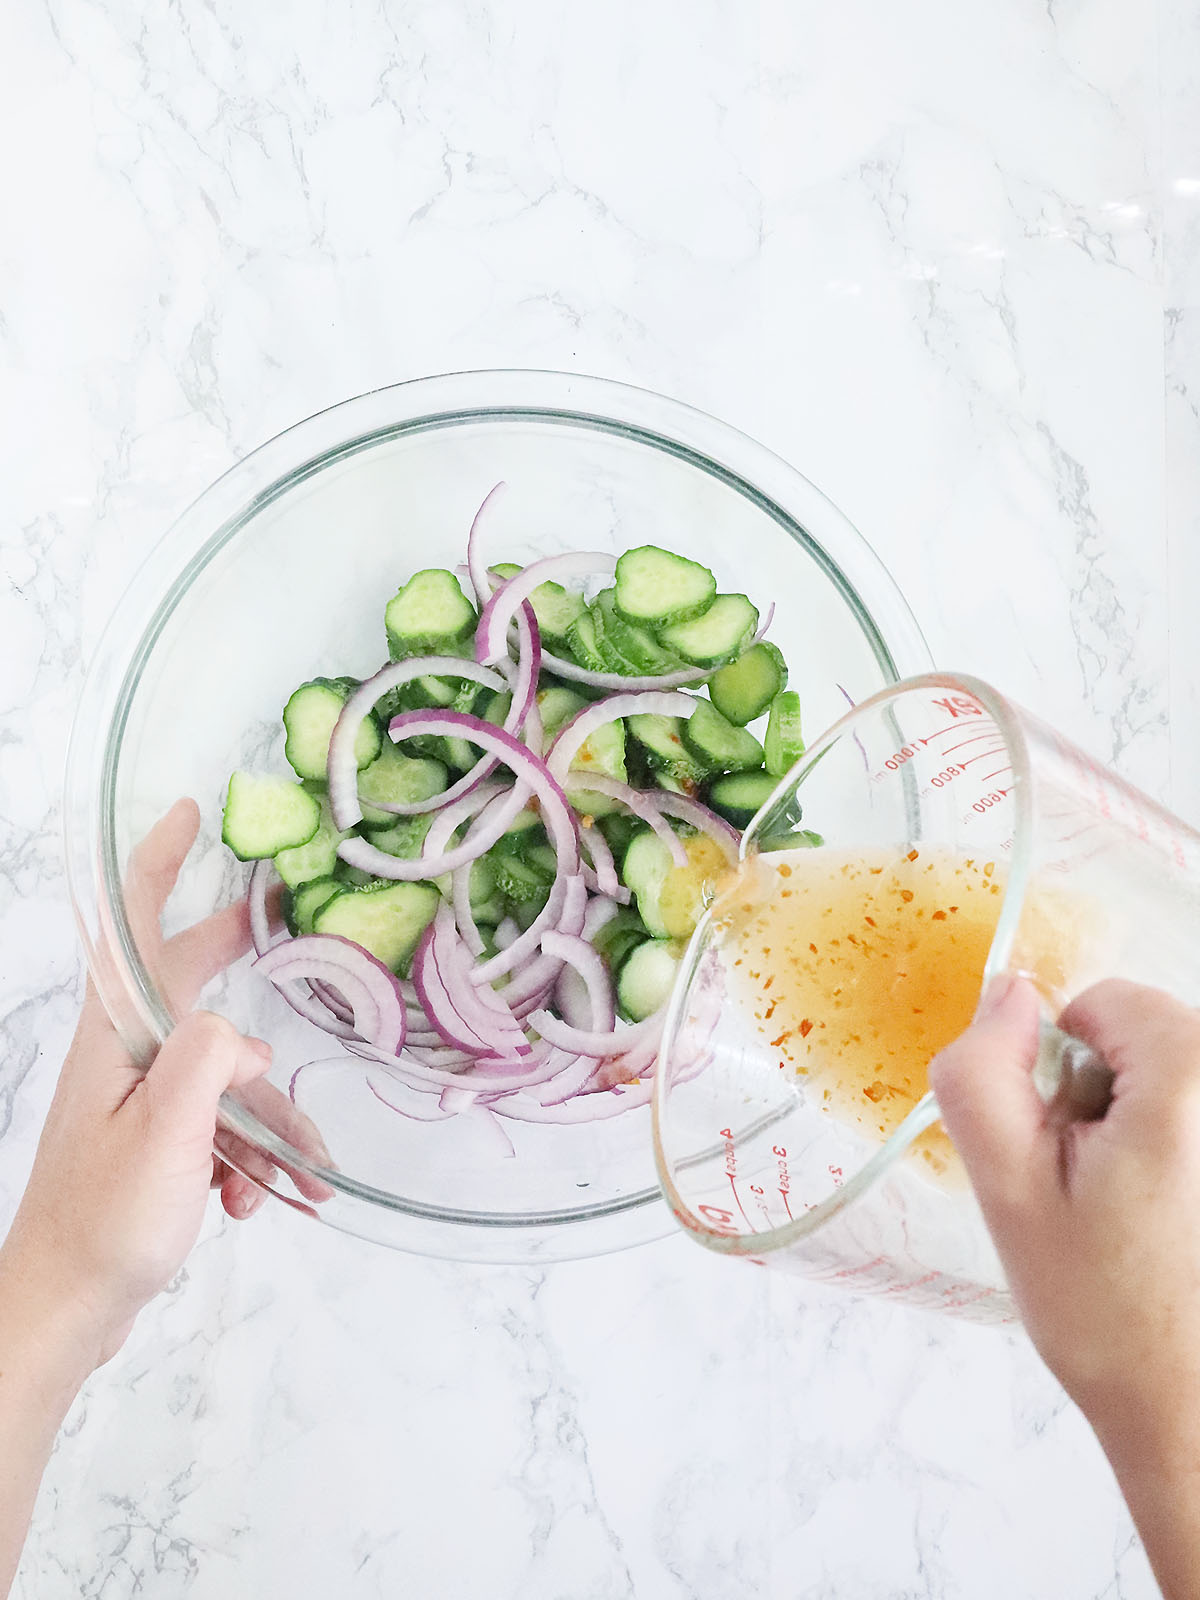 pouring the dressing over the sliced cucumbers and red onions